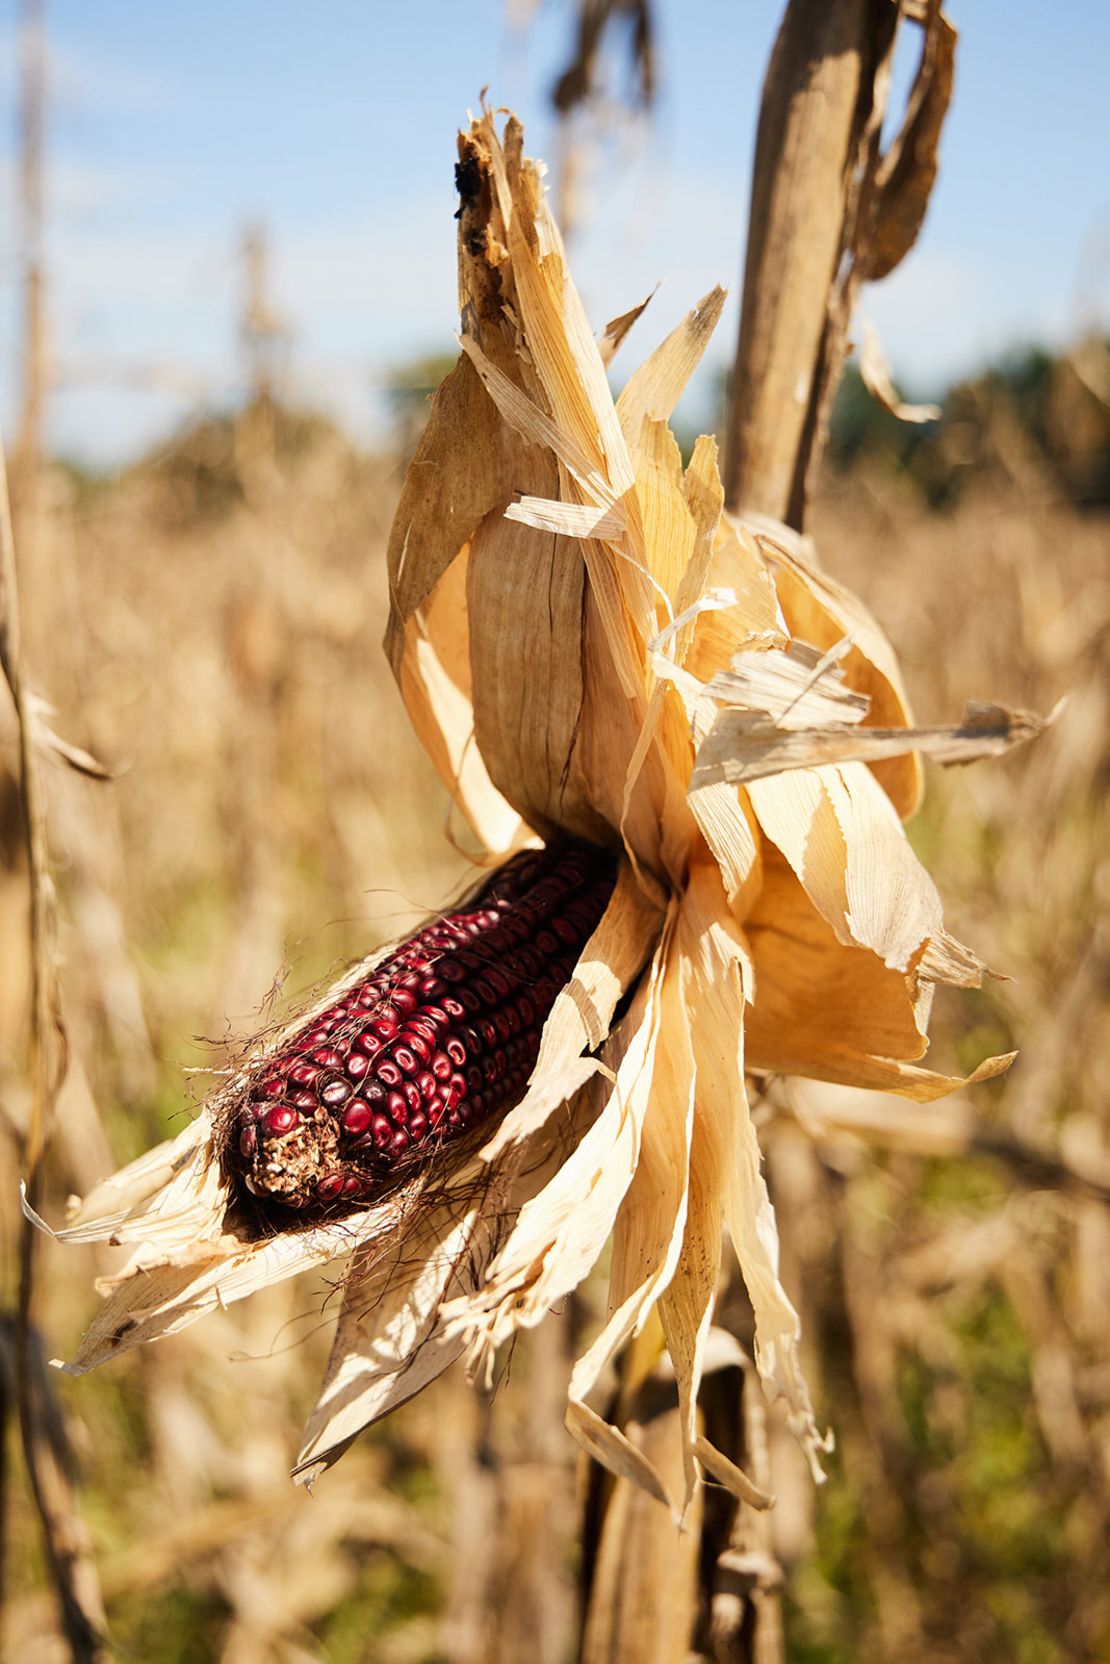 Researchers say Jimmy Red corn is less susceptible to high winds because of its strong root system.